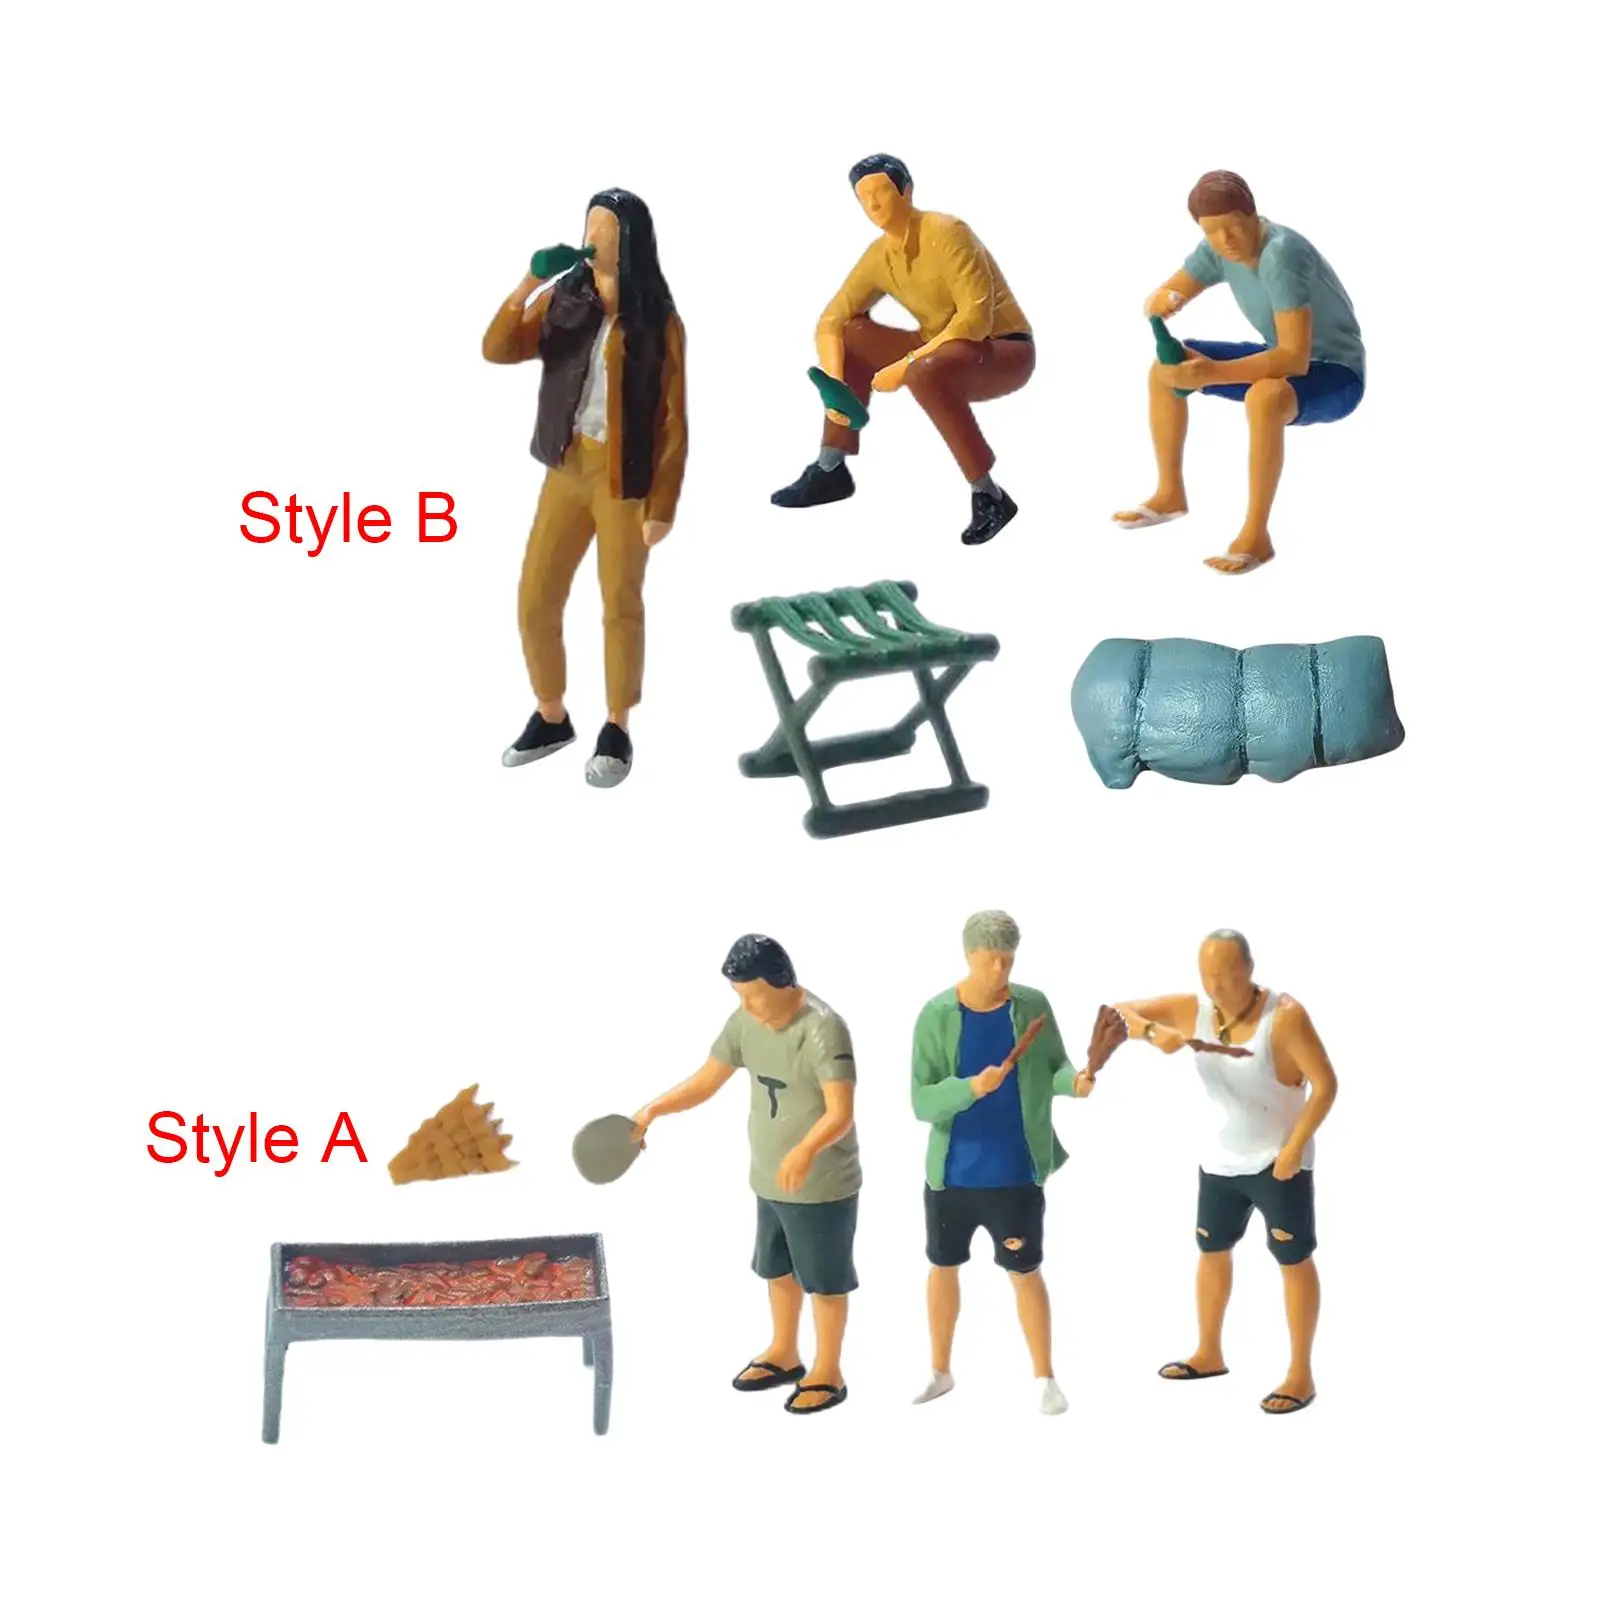 5x 1/64 BBQ Figure Model Set Collections Movie Props Sand Table Layout Decoration S Scale Train Railway Dioramas Miniature Decor